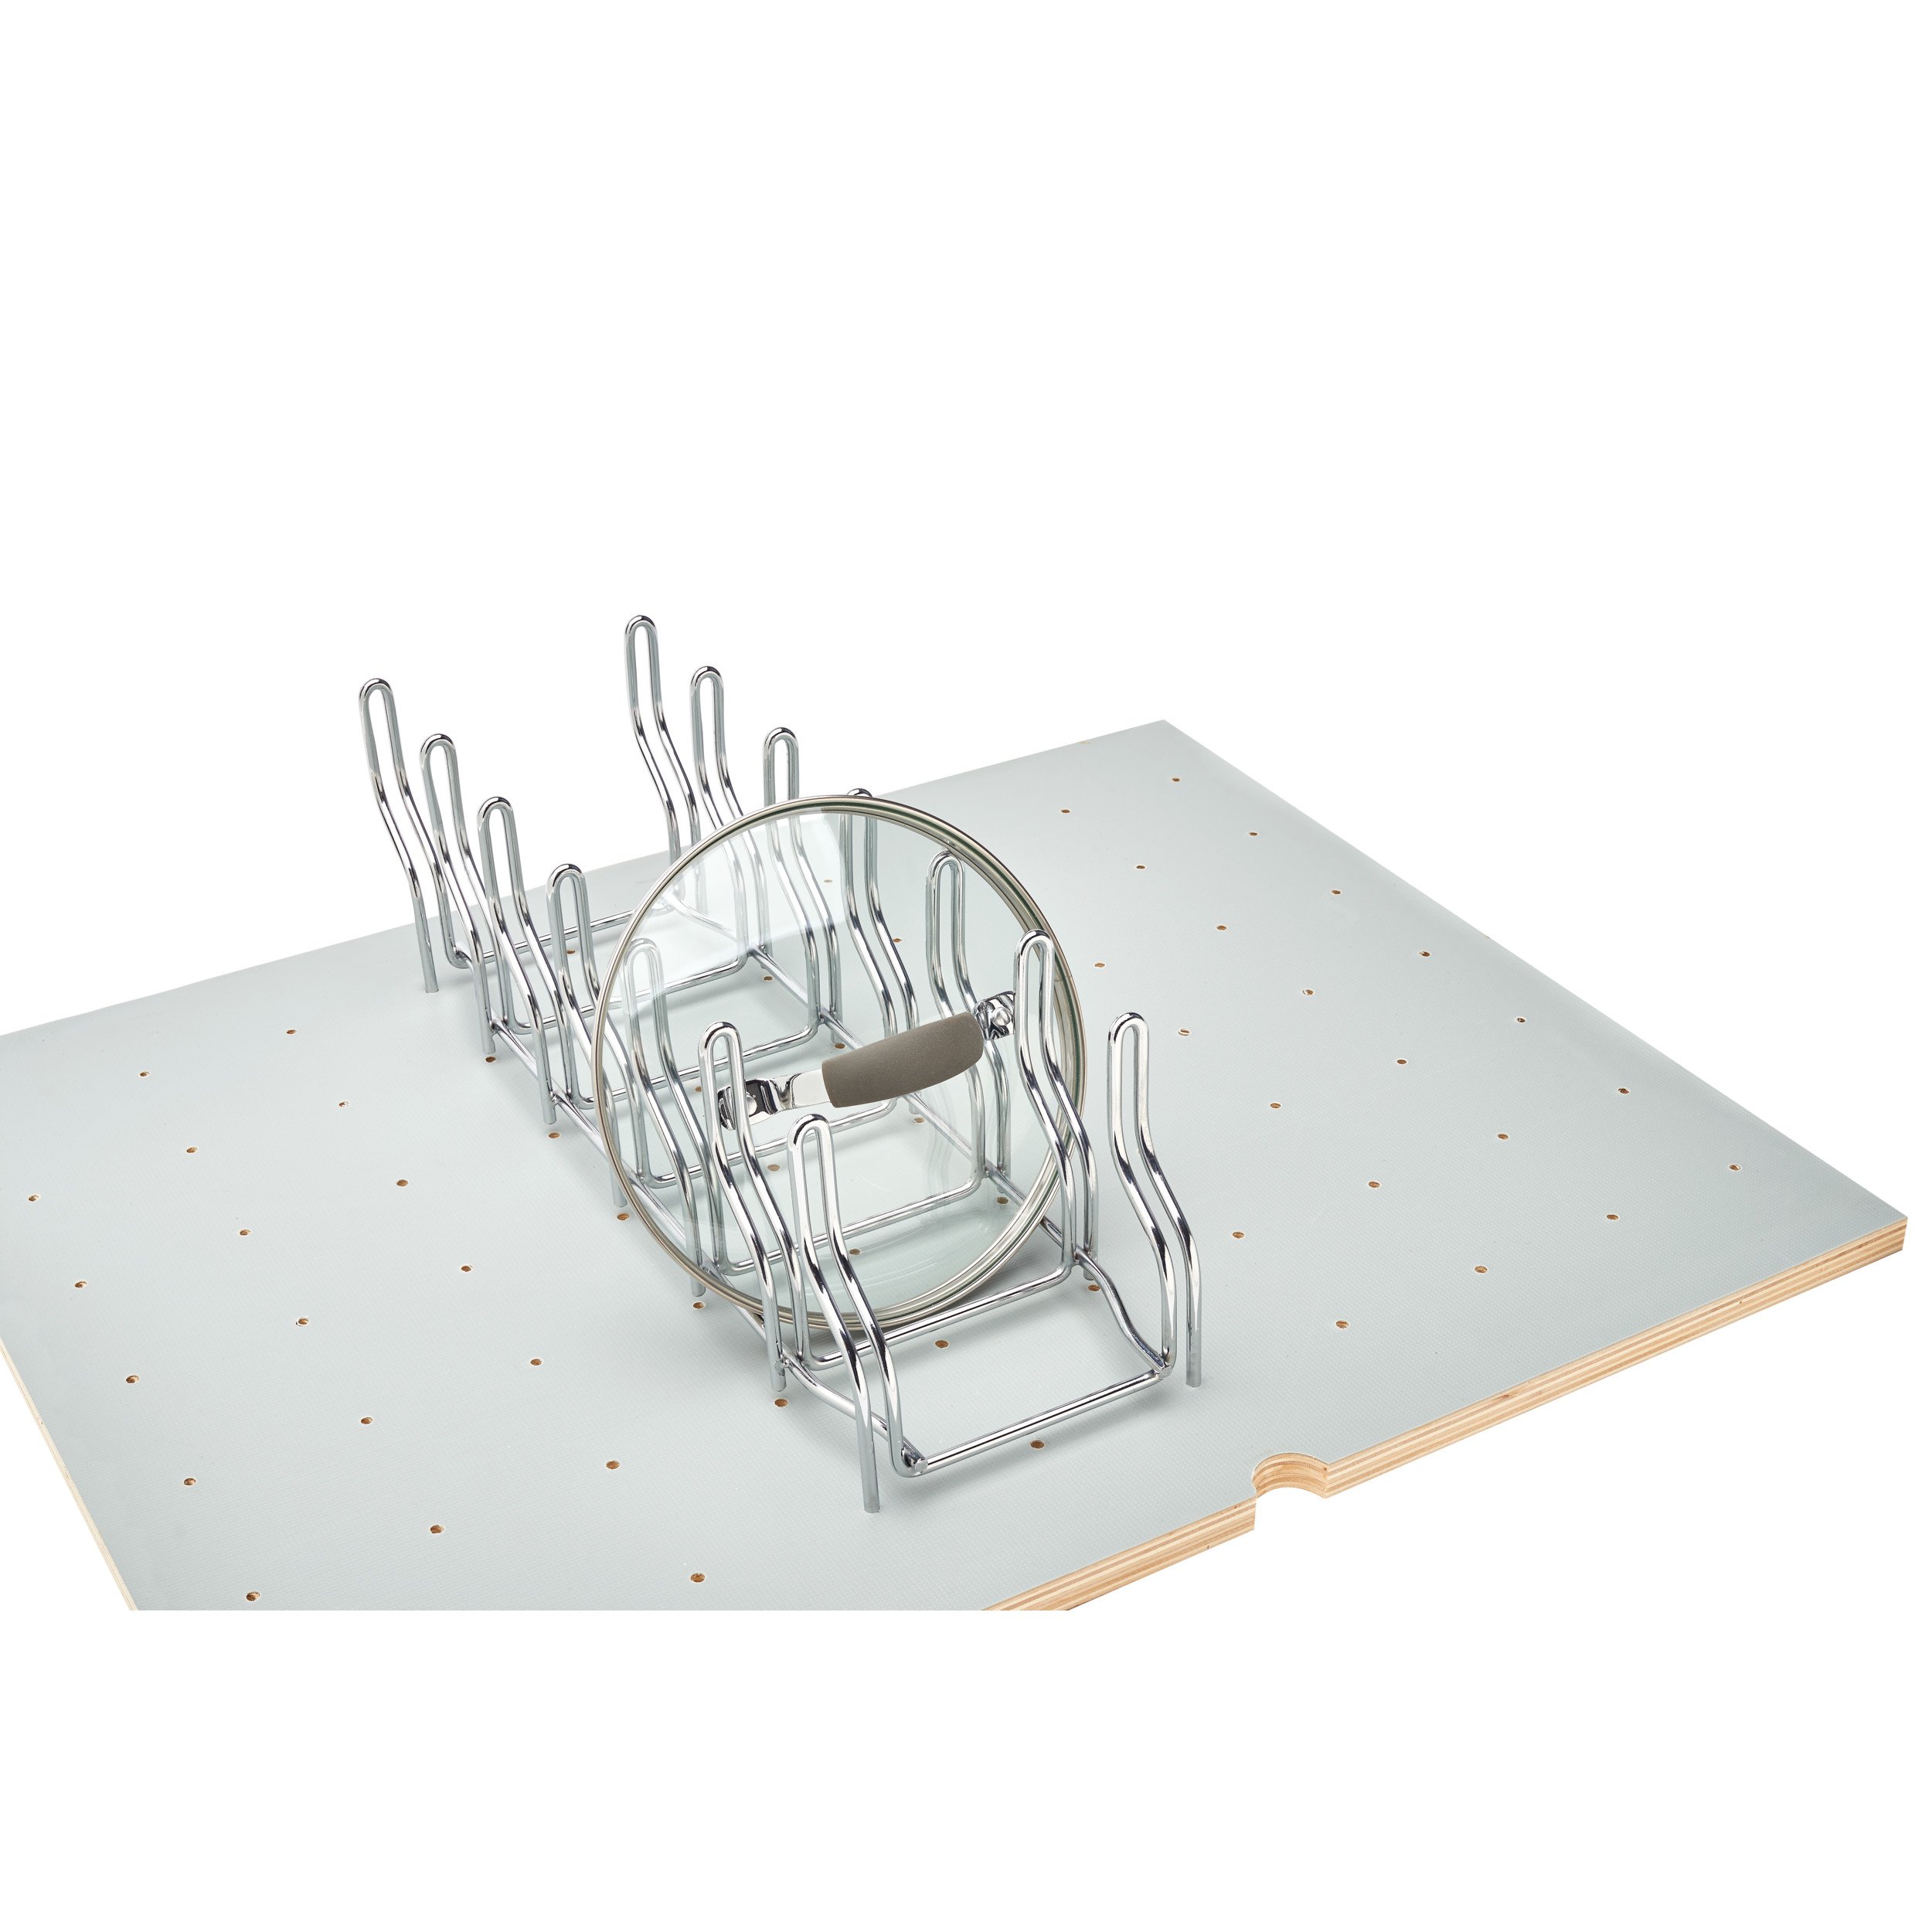 Peg Board Stainless Steel Lid Organizer For Drawers